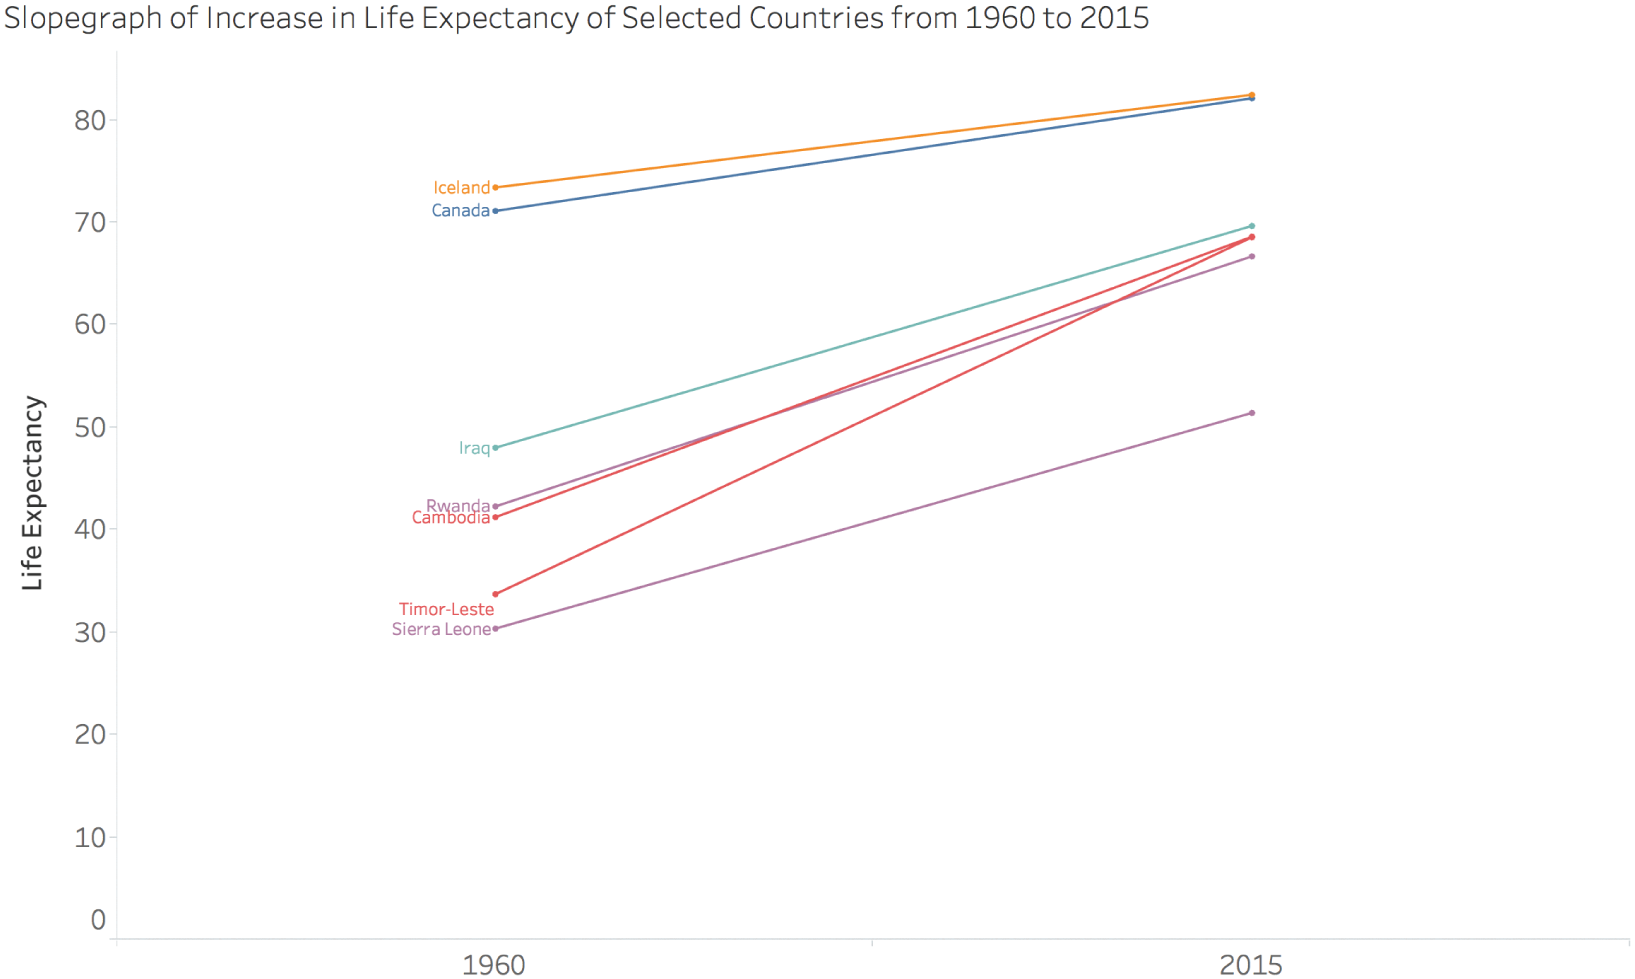 Slope graph depicting the increase in life expectancy of selected countries from 1960 to 2015.